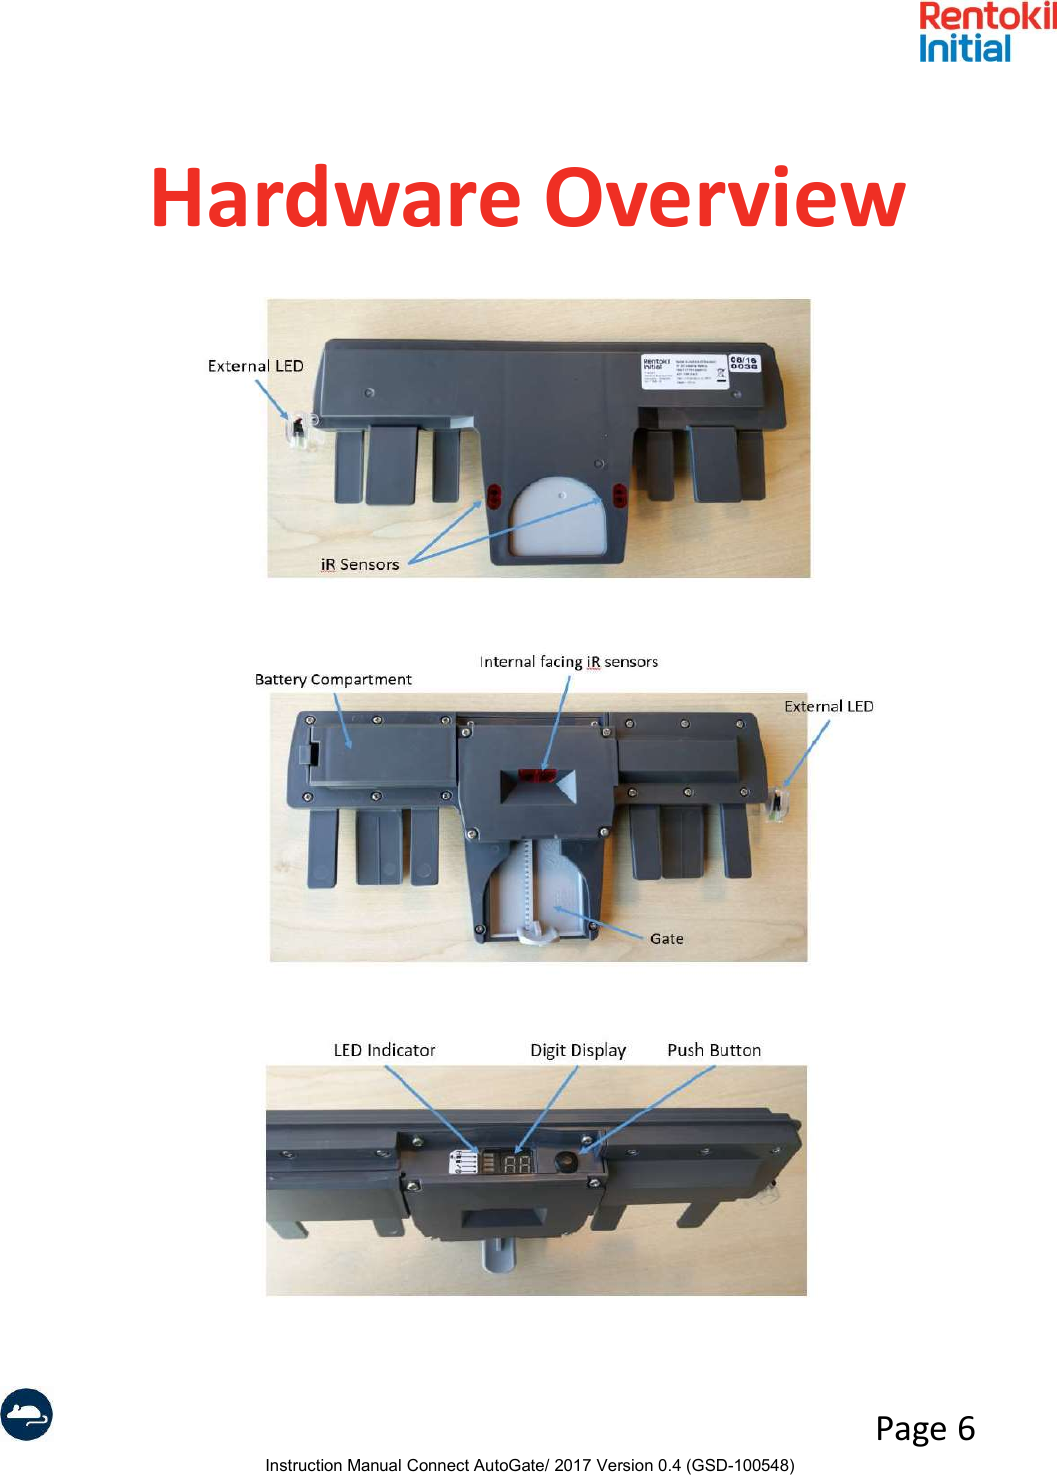 Instruction Manual Connect AutoGate/ 2017 Version 0.4 (GSD-100548)Page 6Hardware Overview